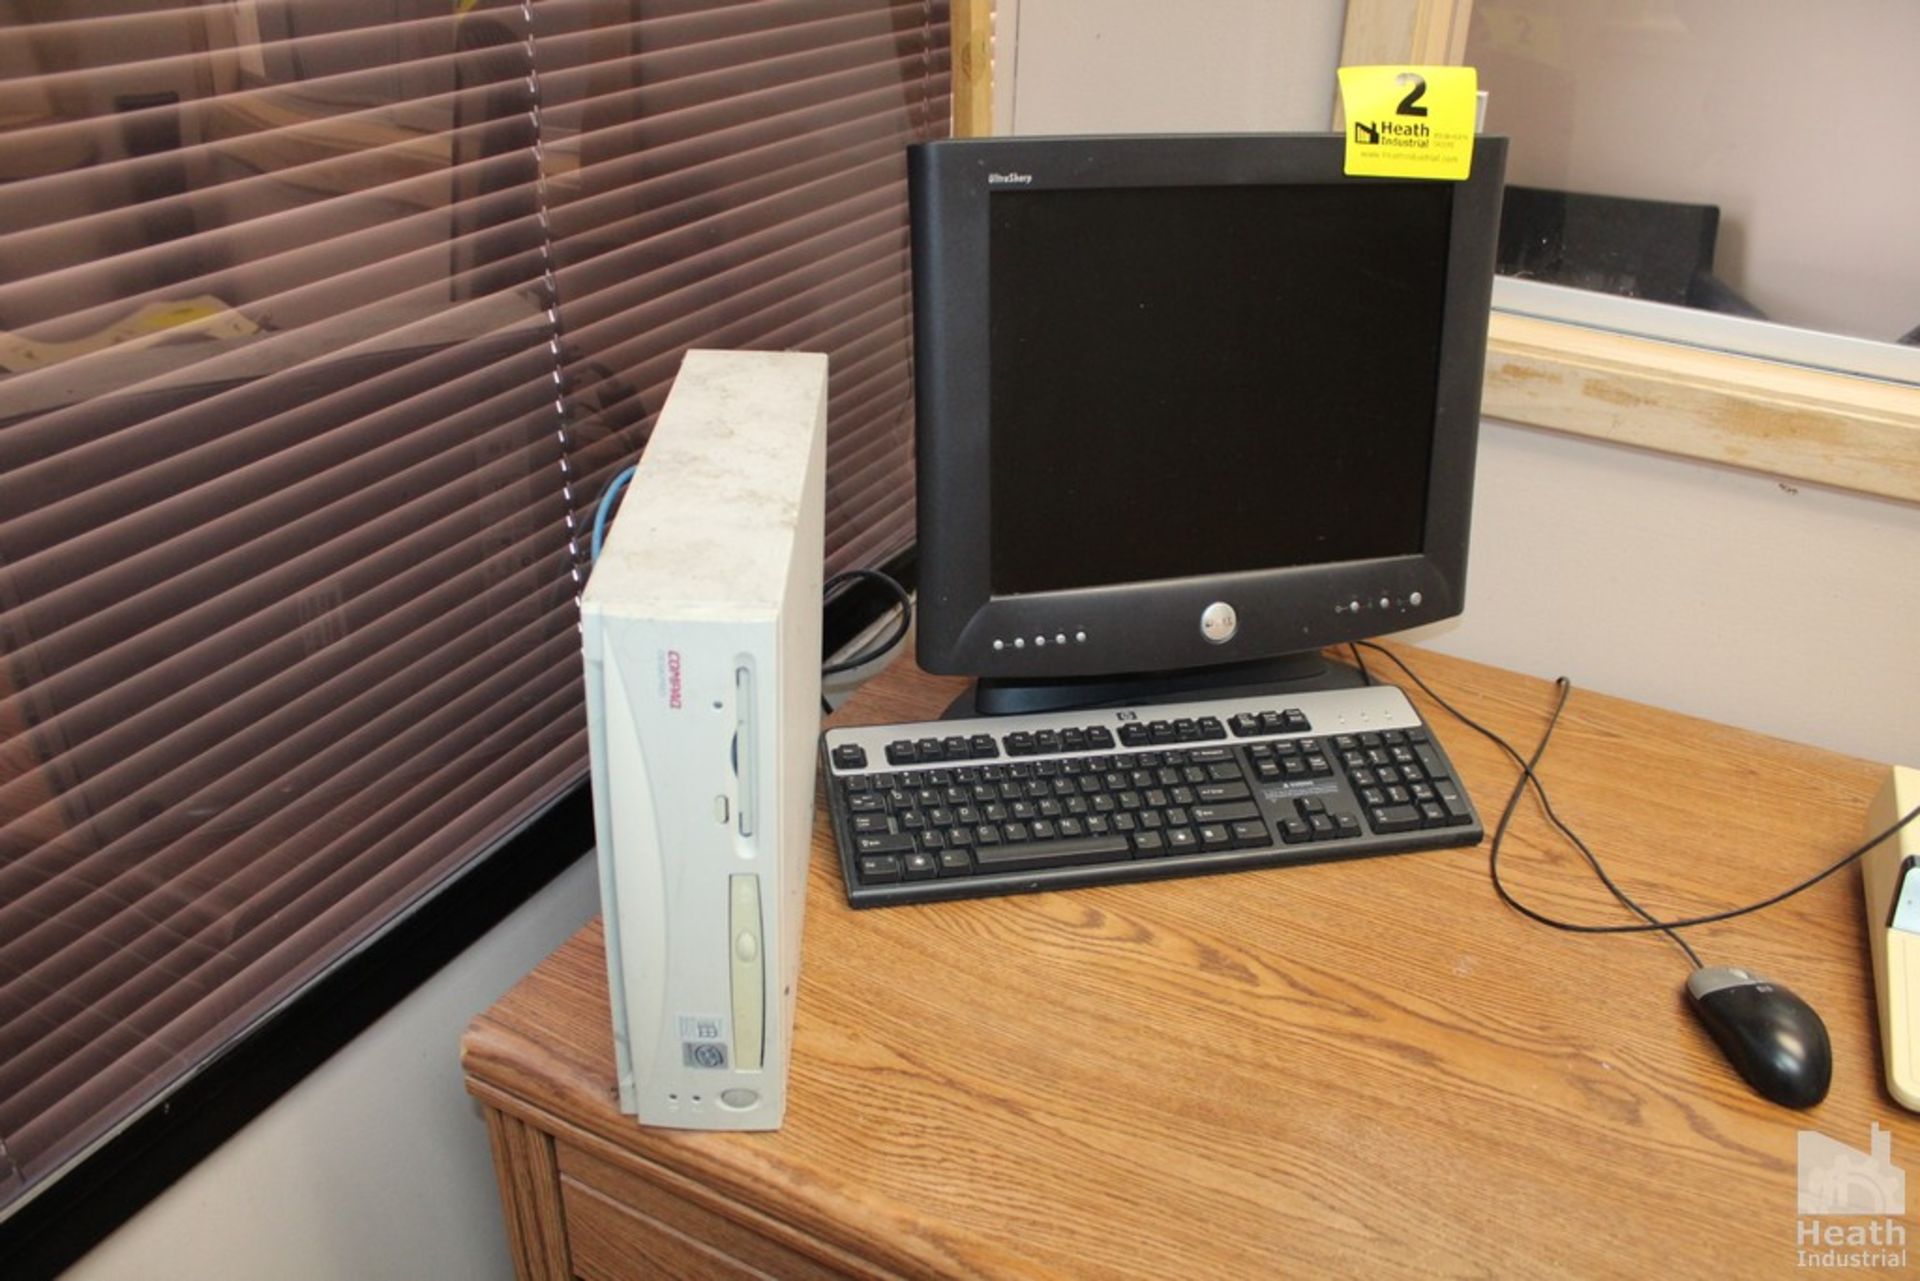 COMPAQ DESKPRO PC WITH MONITOR, KEYBOARD AND MOUSE - Image 2 of 3